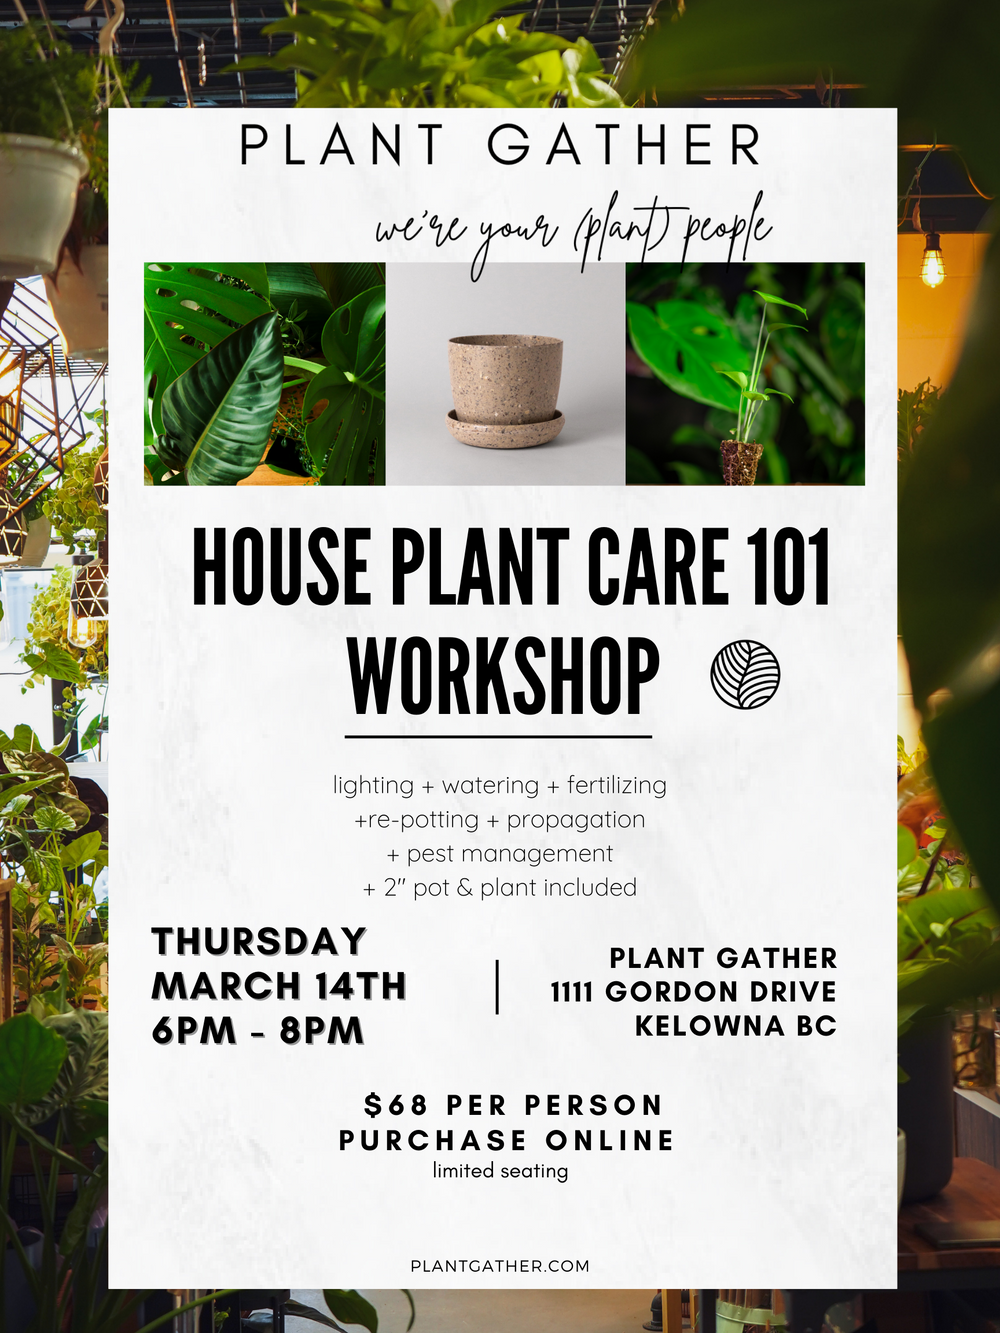 House Plant Care 101 *WORKSHOP* - March 14th @ 6PM